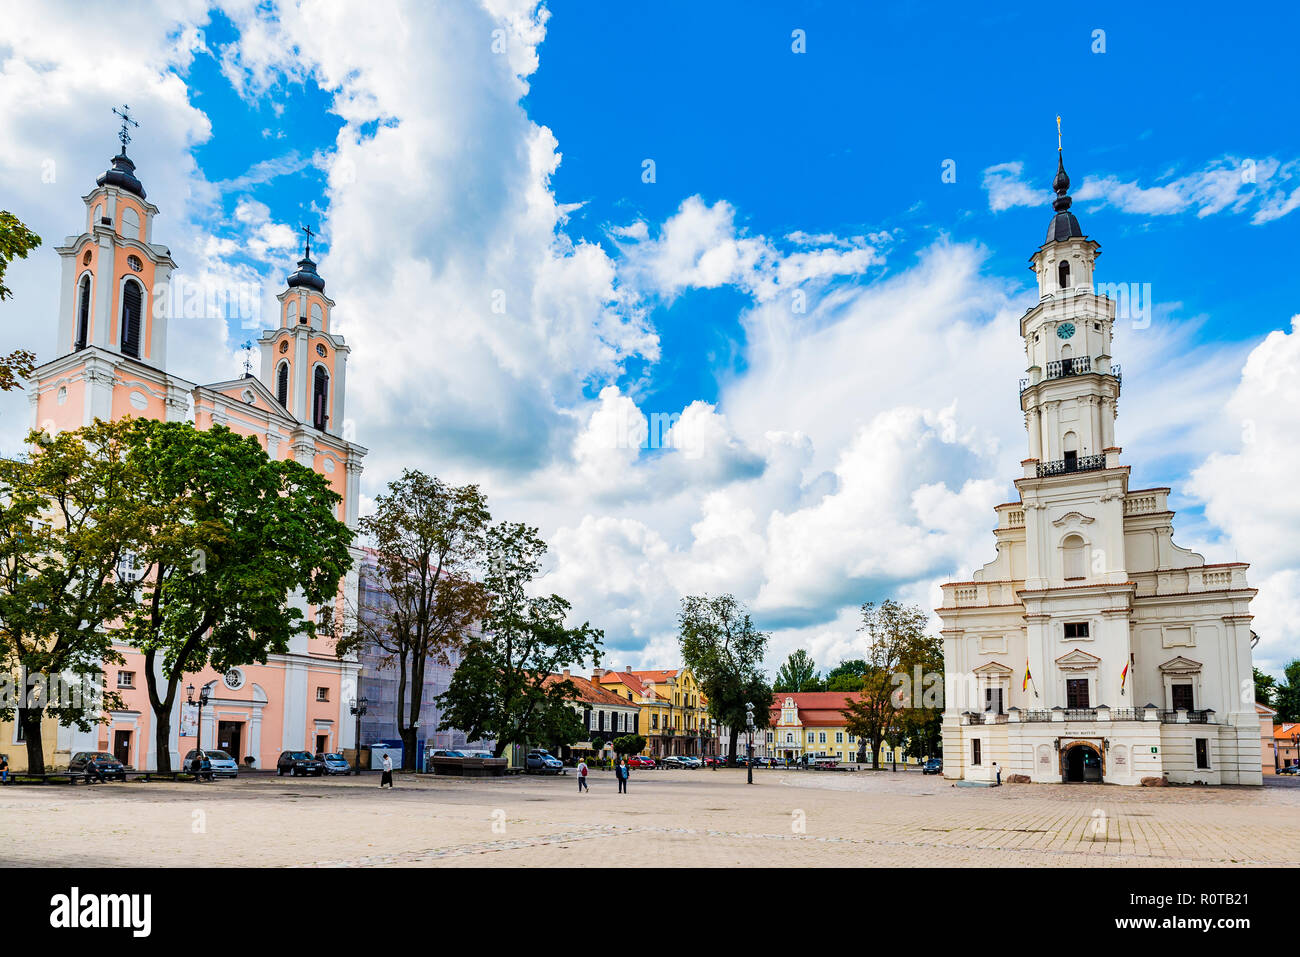 Church of St. Francis Xavier and the Town Hall of Kaunas, also called the white swan. Kaunas, Kaunas County, Lithuania, Baltic states, Europe. Stock Photo